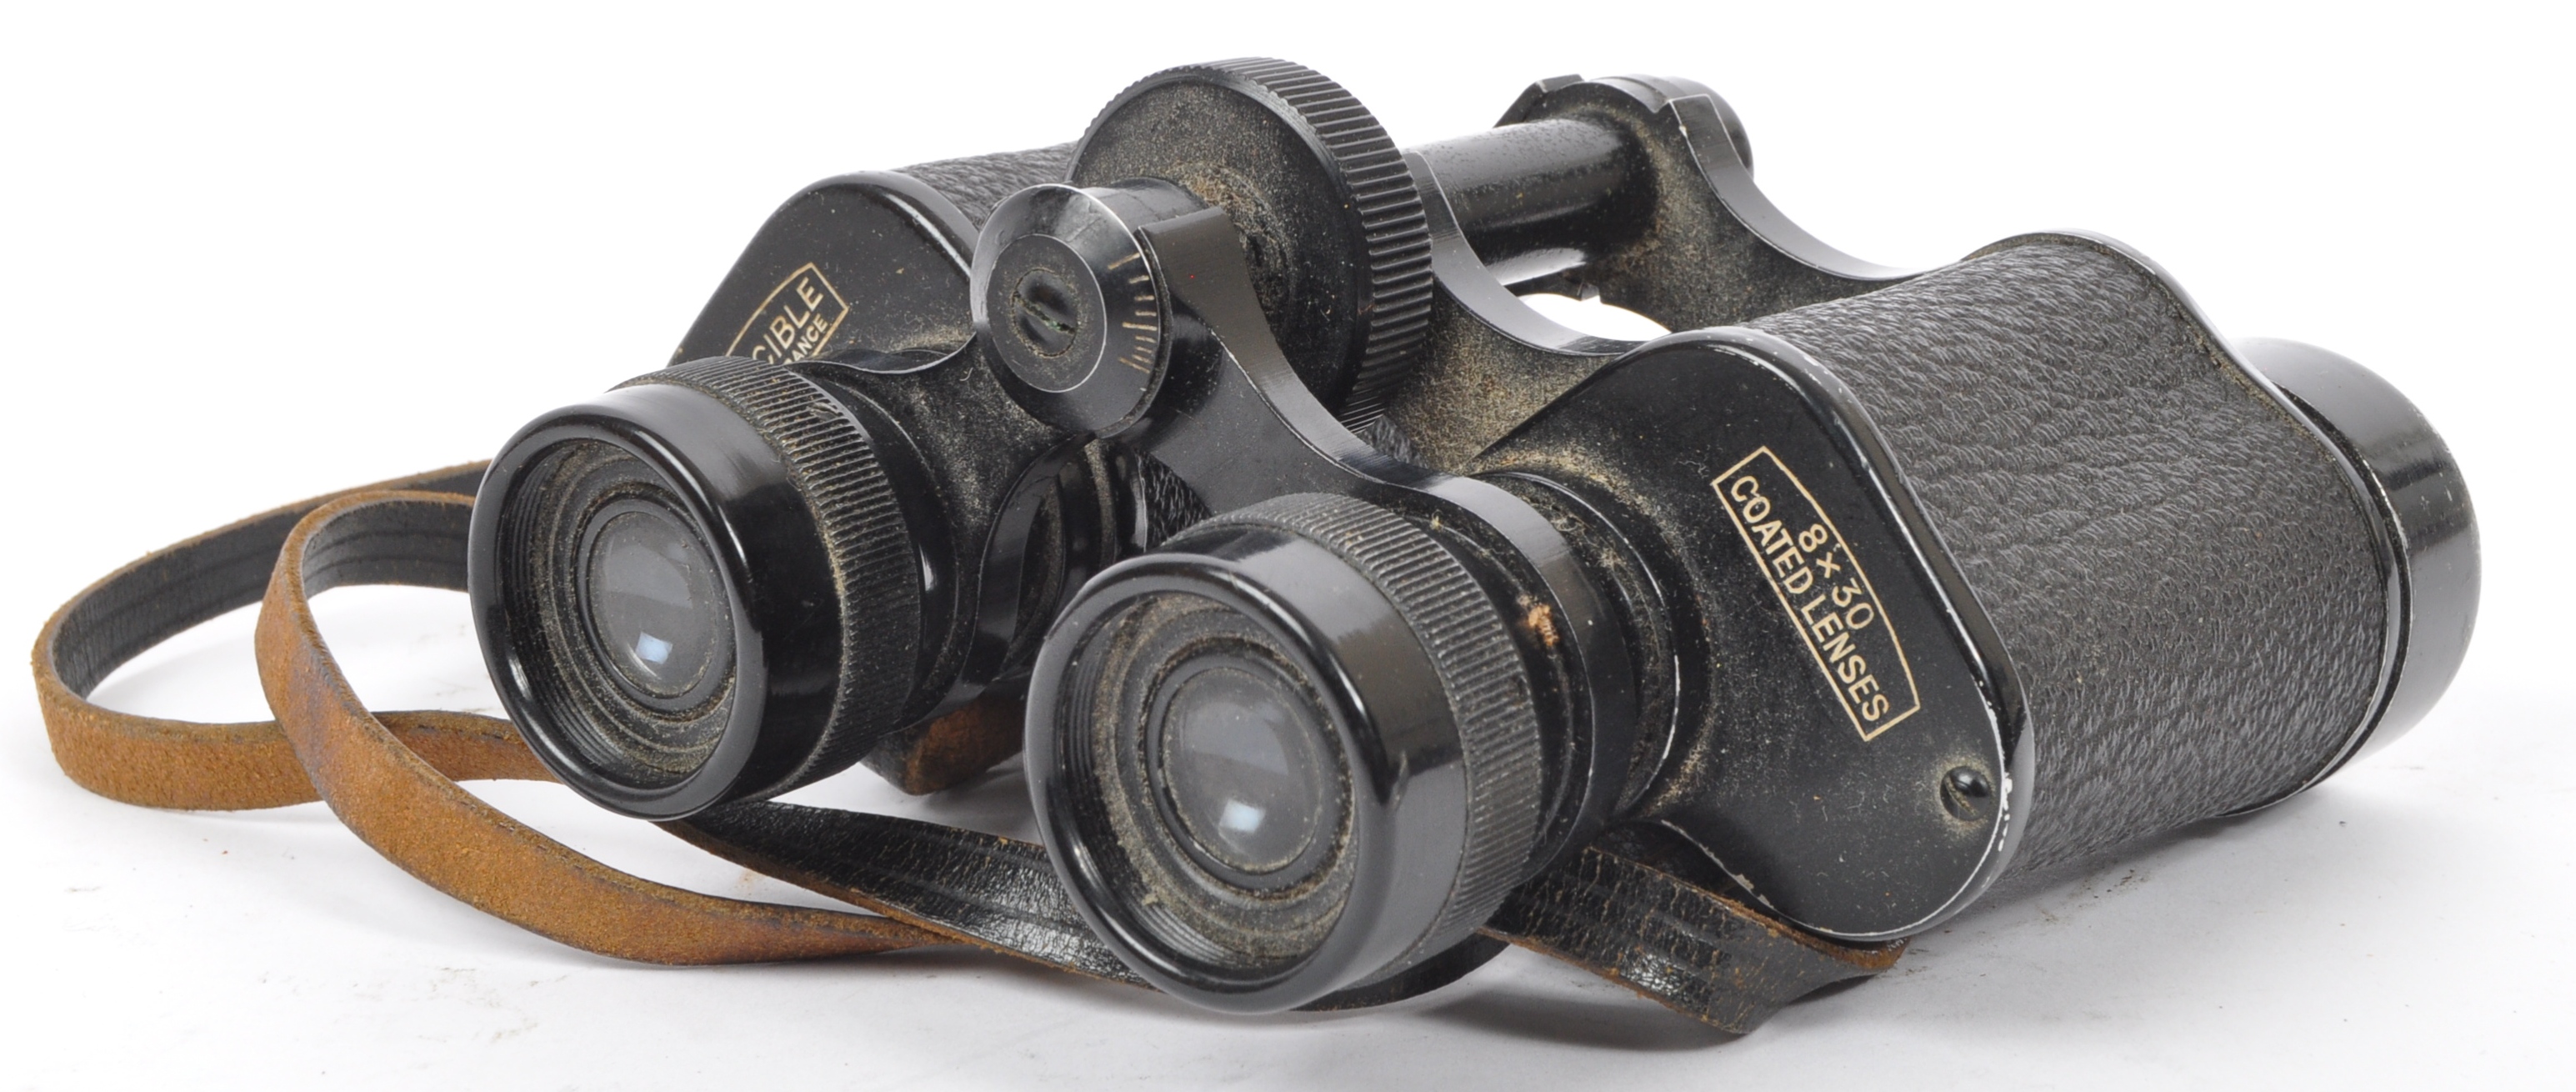 TWO 20TH CENTURY BINOCULARS - CARL ZEISS AND INVINCIBLE - Image 5 of 6